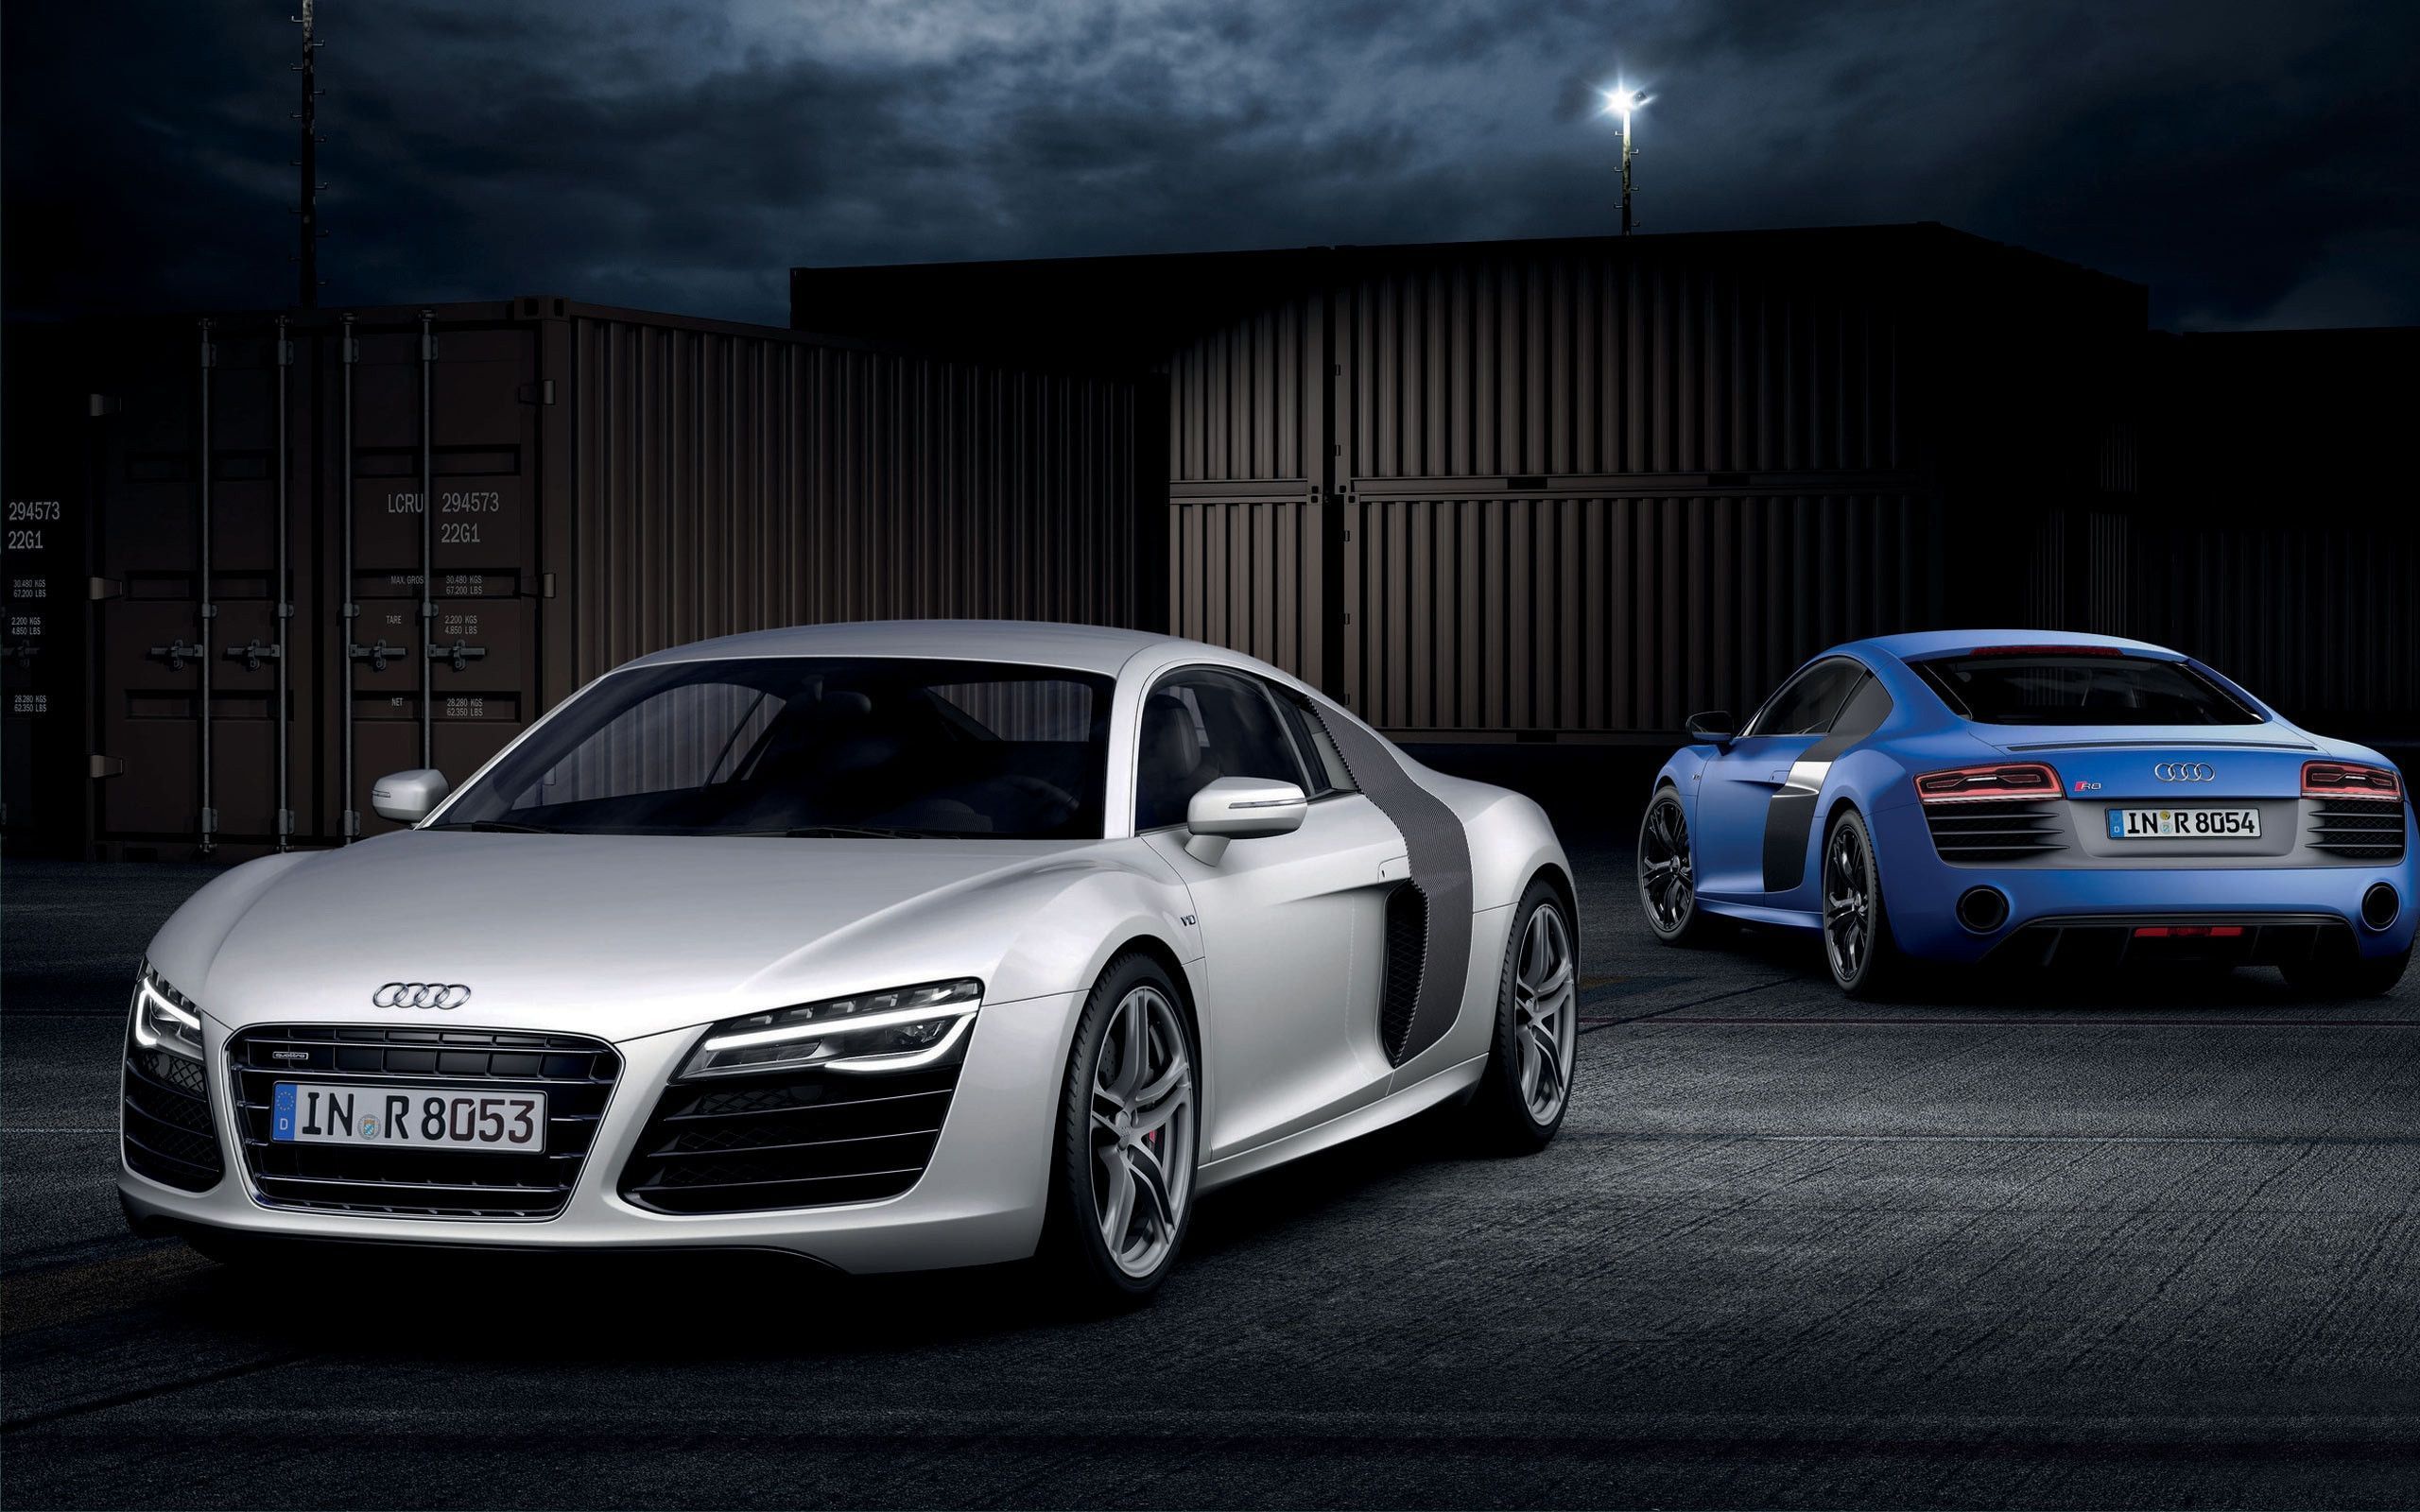 Pictures Of An Audi R8 Wallpaper HD Background ...